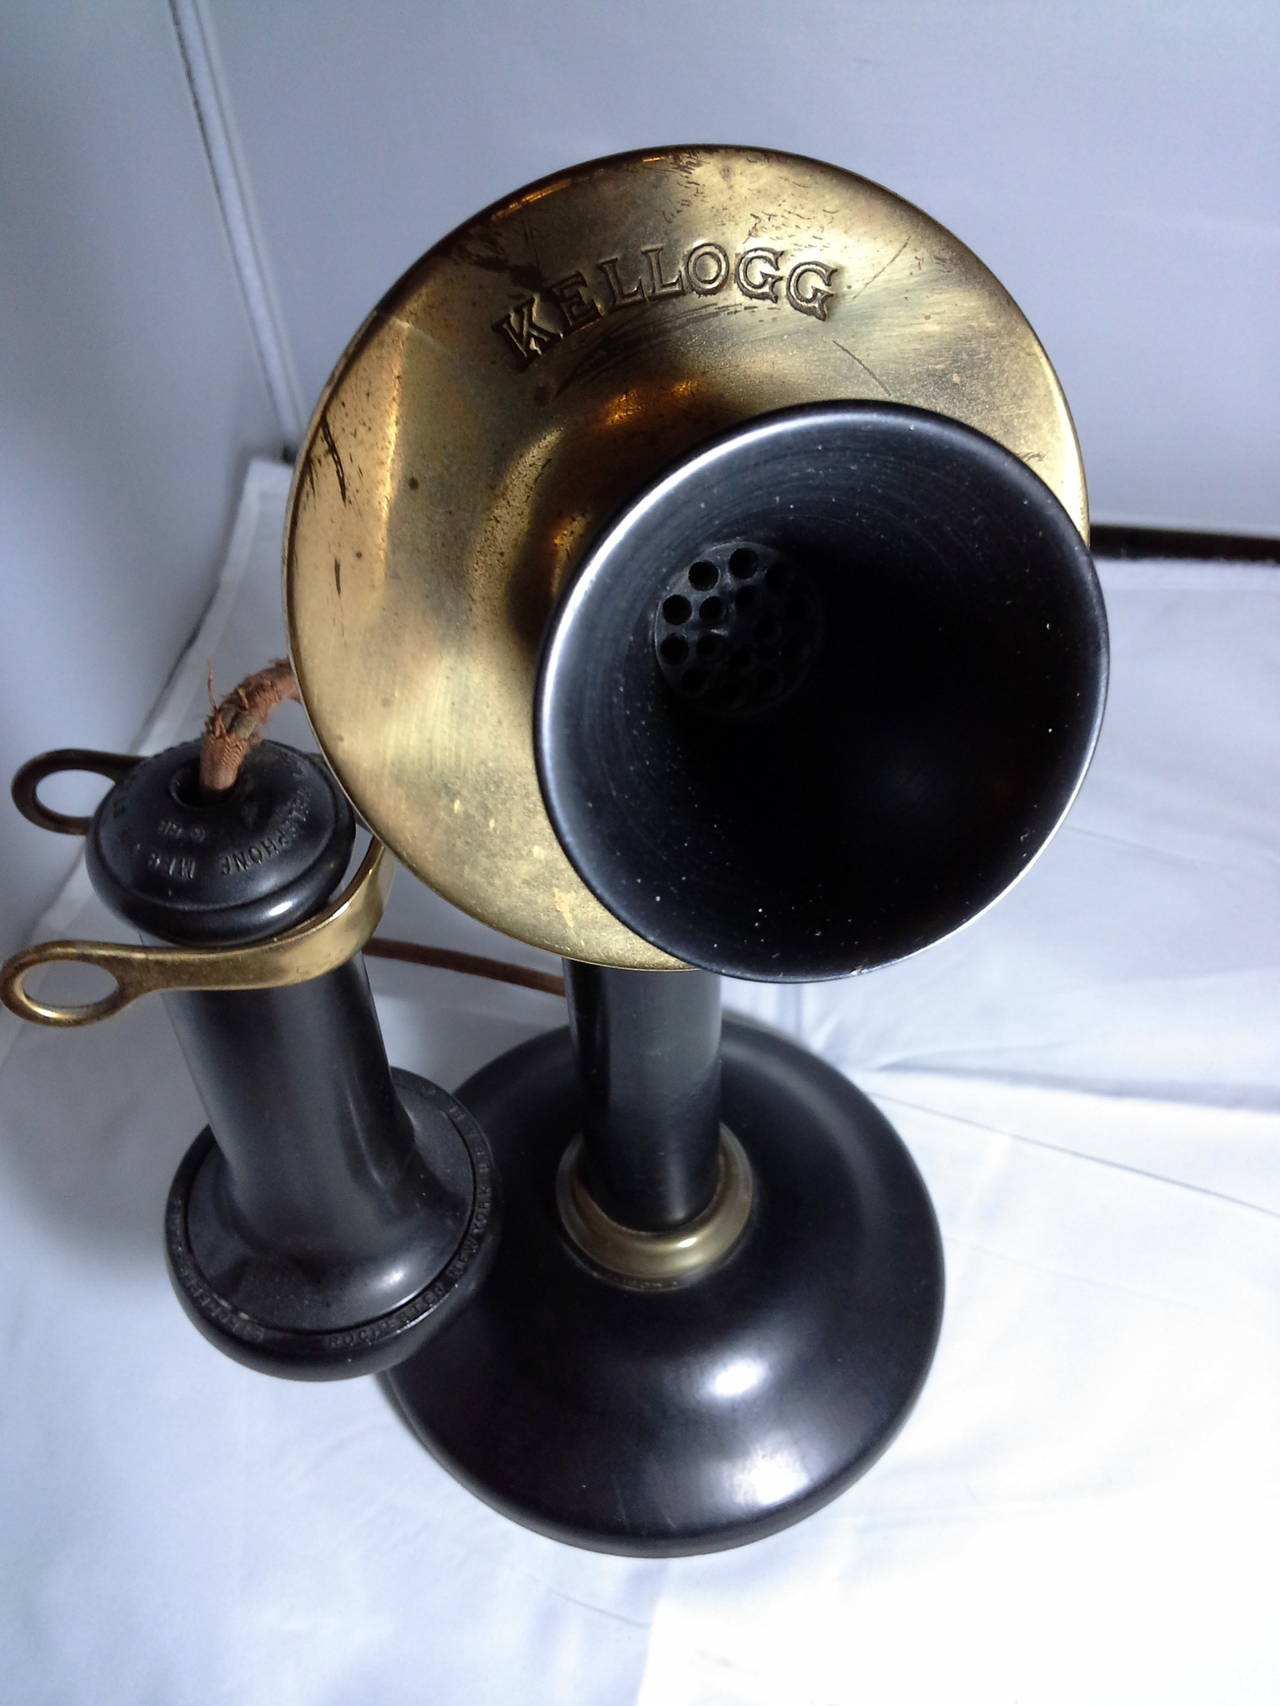 Kellogg Chicago Brass & Bakelite Candlestick Telephone, Patented 1901, All Original including handset wire, Marked on the top brass mouth piece section, The telephone measures 11